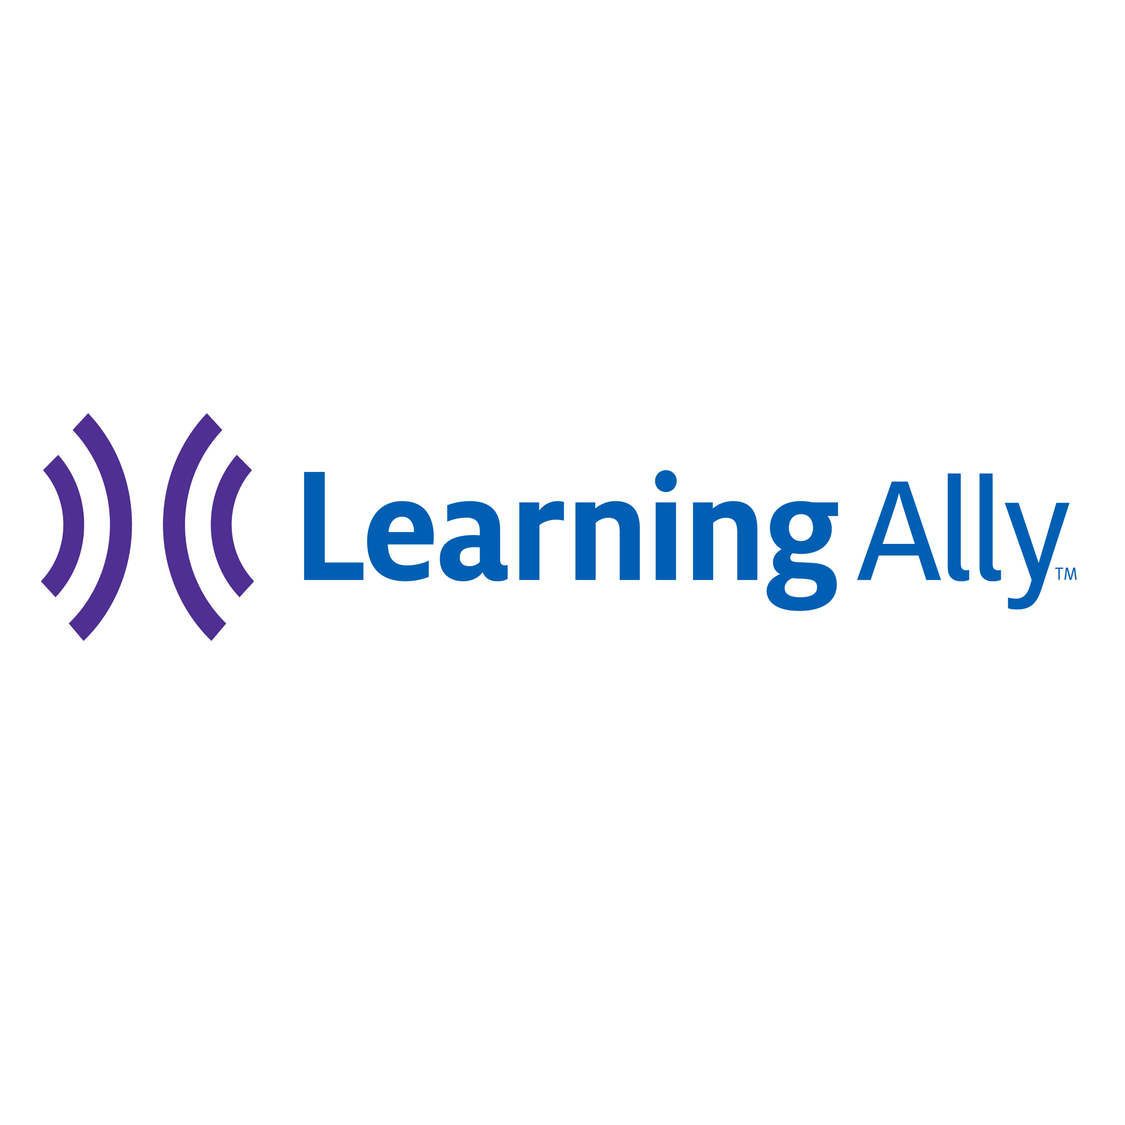 Learning Ally logo, Two purple radio waves facing each other. Next to it in bolded blue text it reads “Learning Ally”